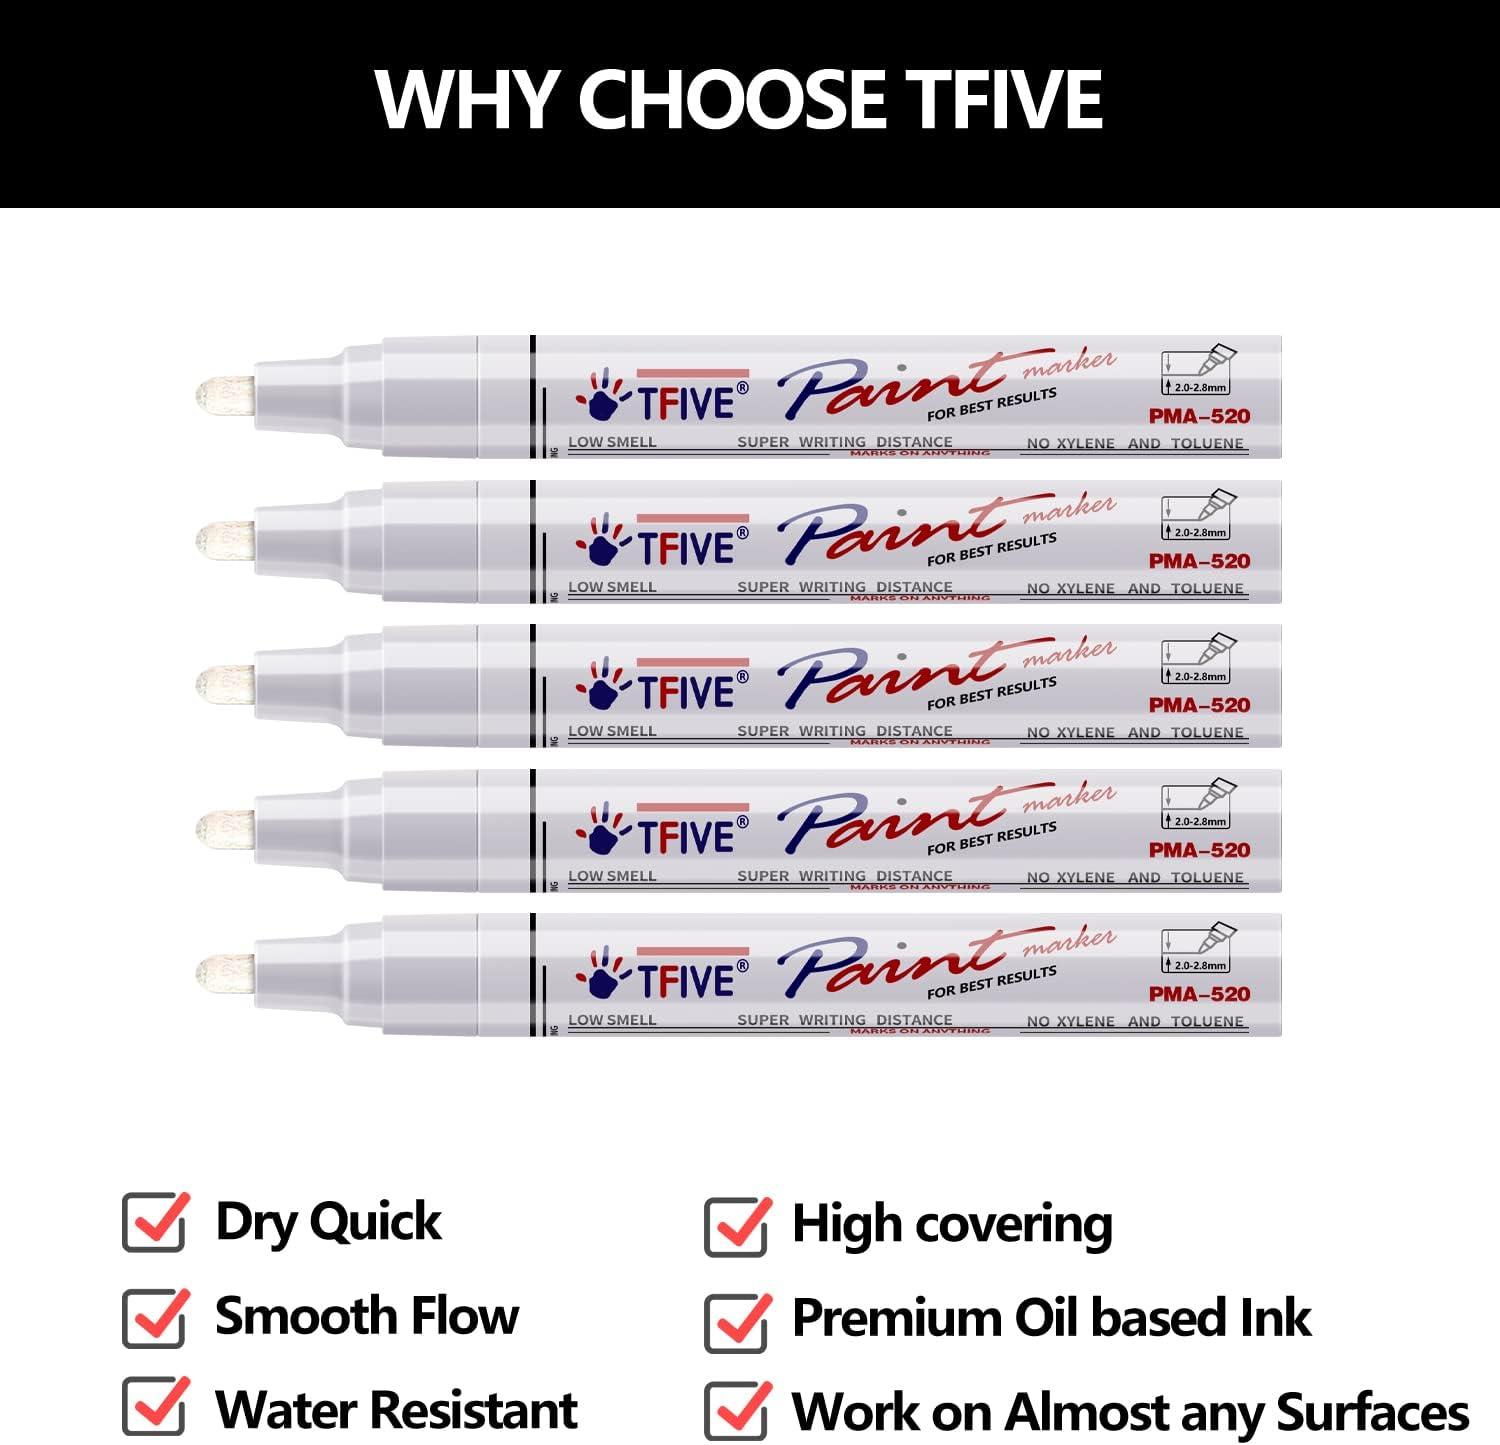 TFIVE White Paint Marker Paint Pens - 5 Pack Oil Based Permanent Marker Pen, Medium Tip, Waterproof & Quick Dry, for Office, Art Projects, Rock